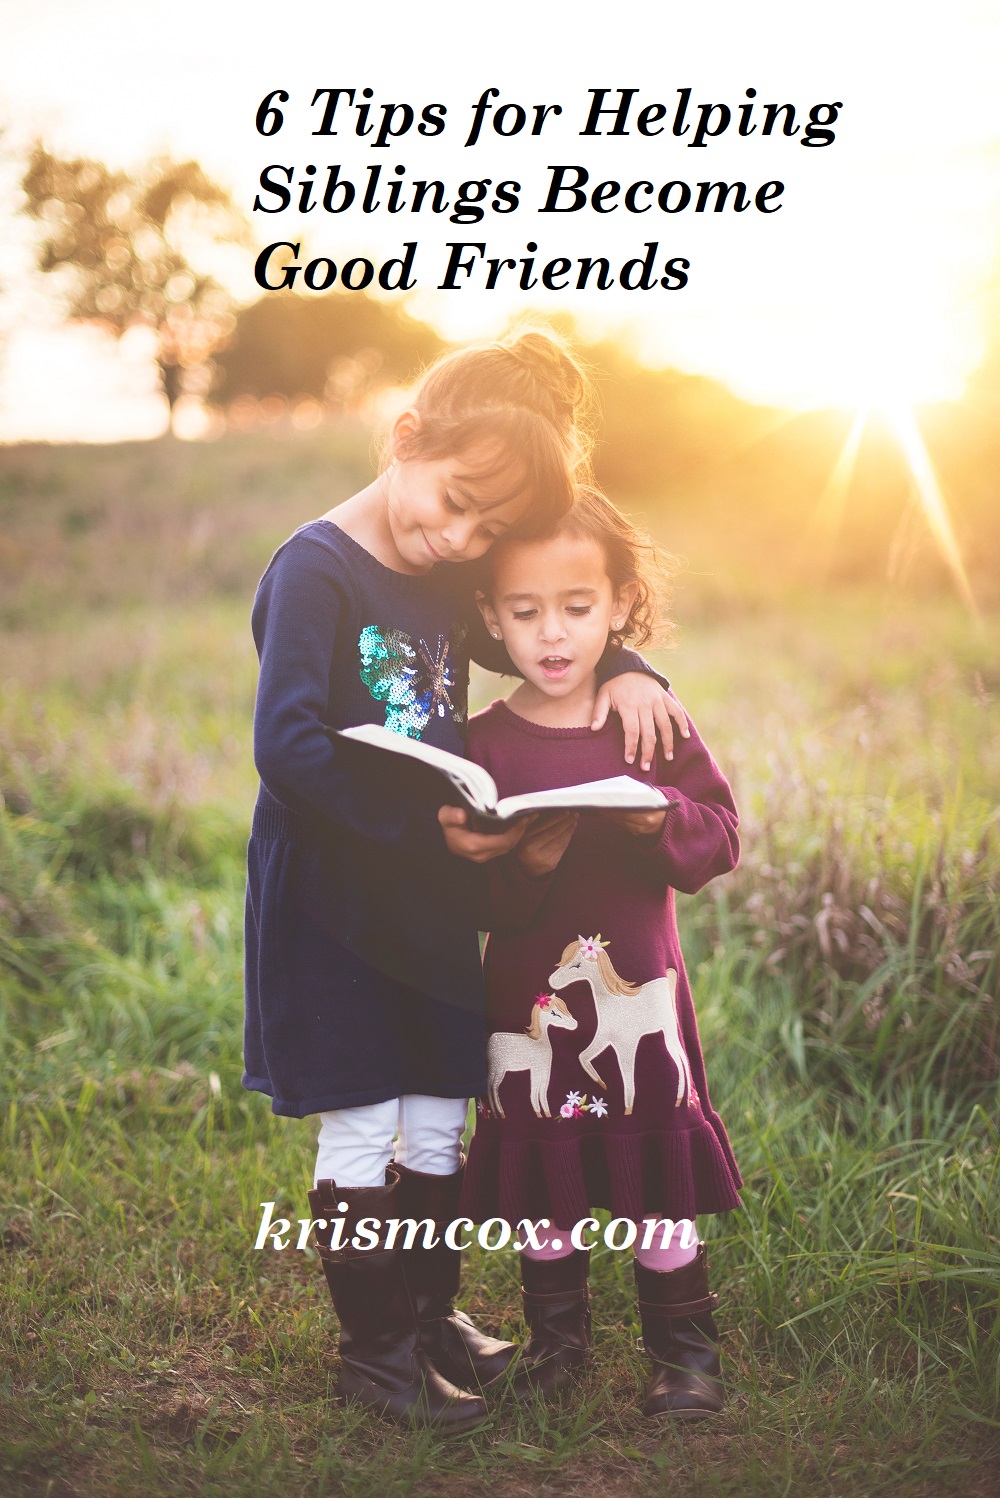 6 Tips for Helping Siblings Become Good Friends